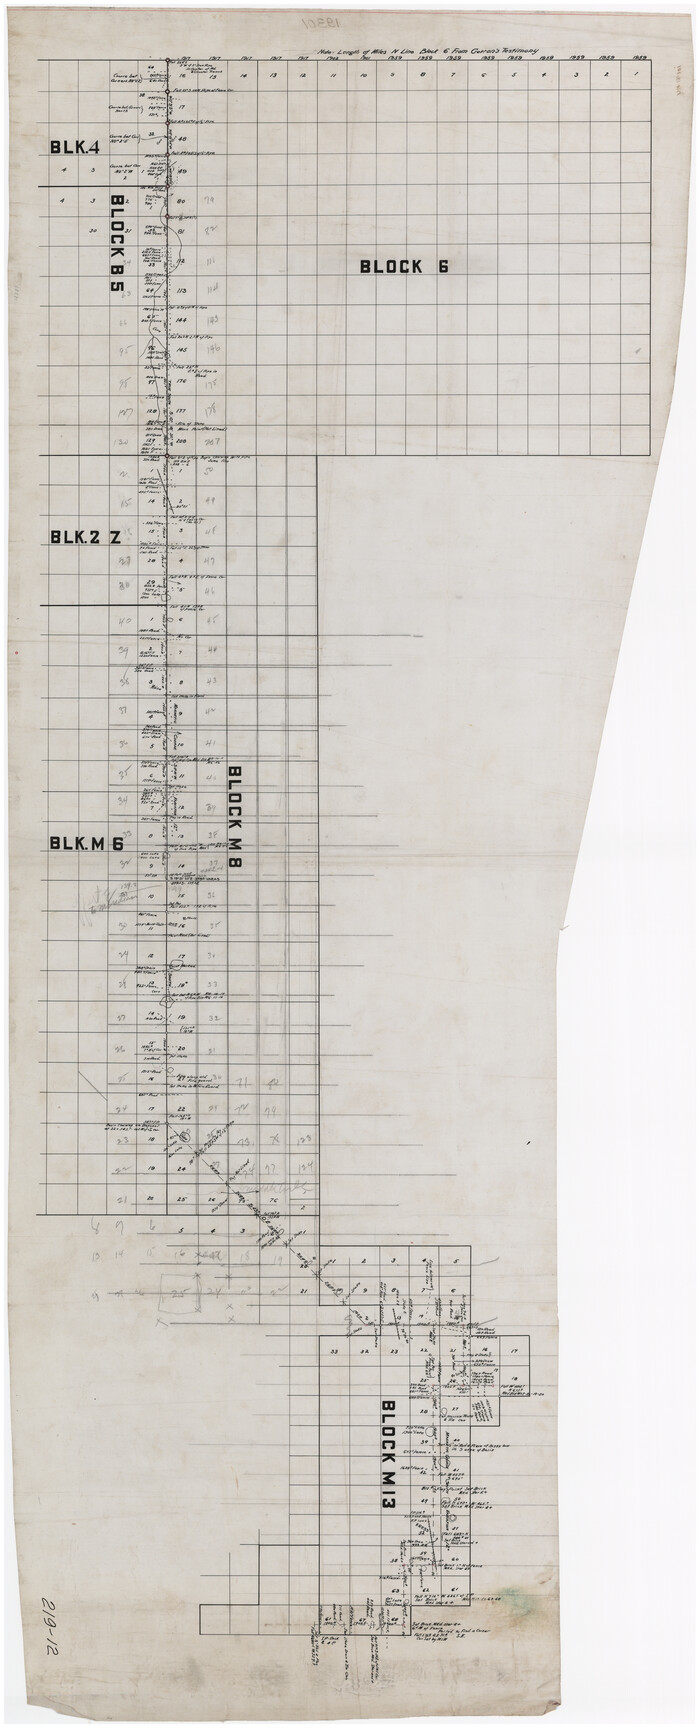 89645, [Sketch of part of Blks. 4, B5, 6, 2Z, M6, M8, and M13], Twichell Survey Records